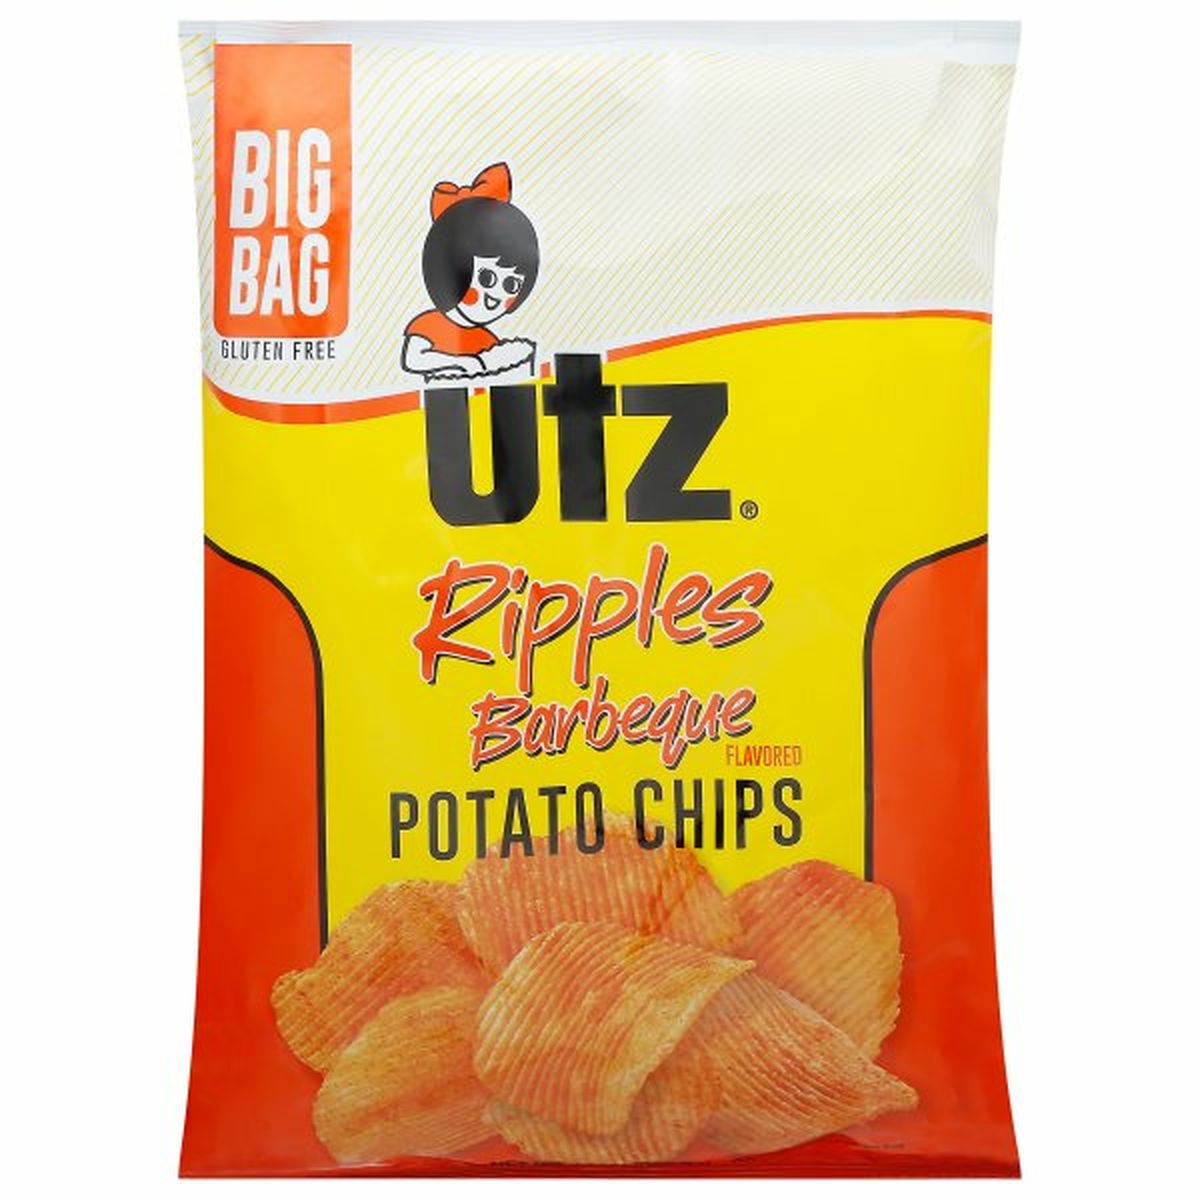 Calories in Utz Potato Chips, Ripples, Barbeque, Pre-Priced .99